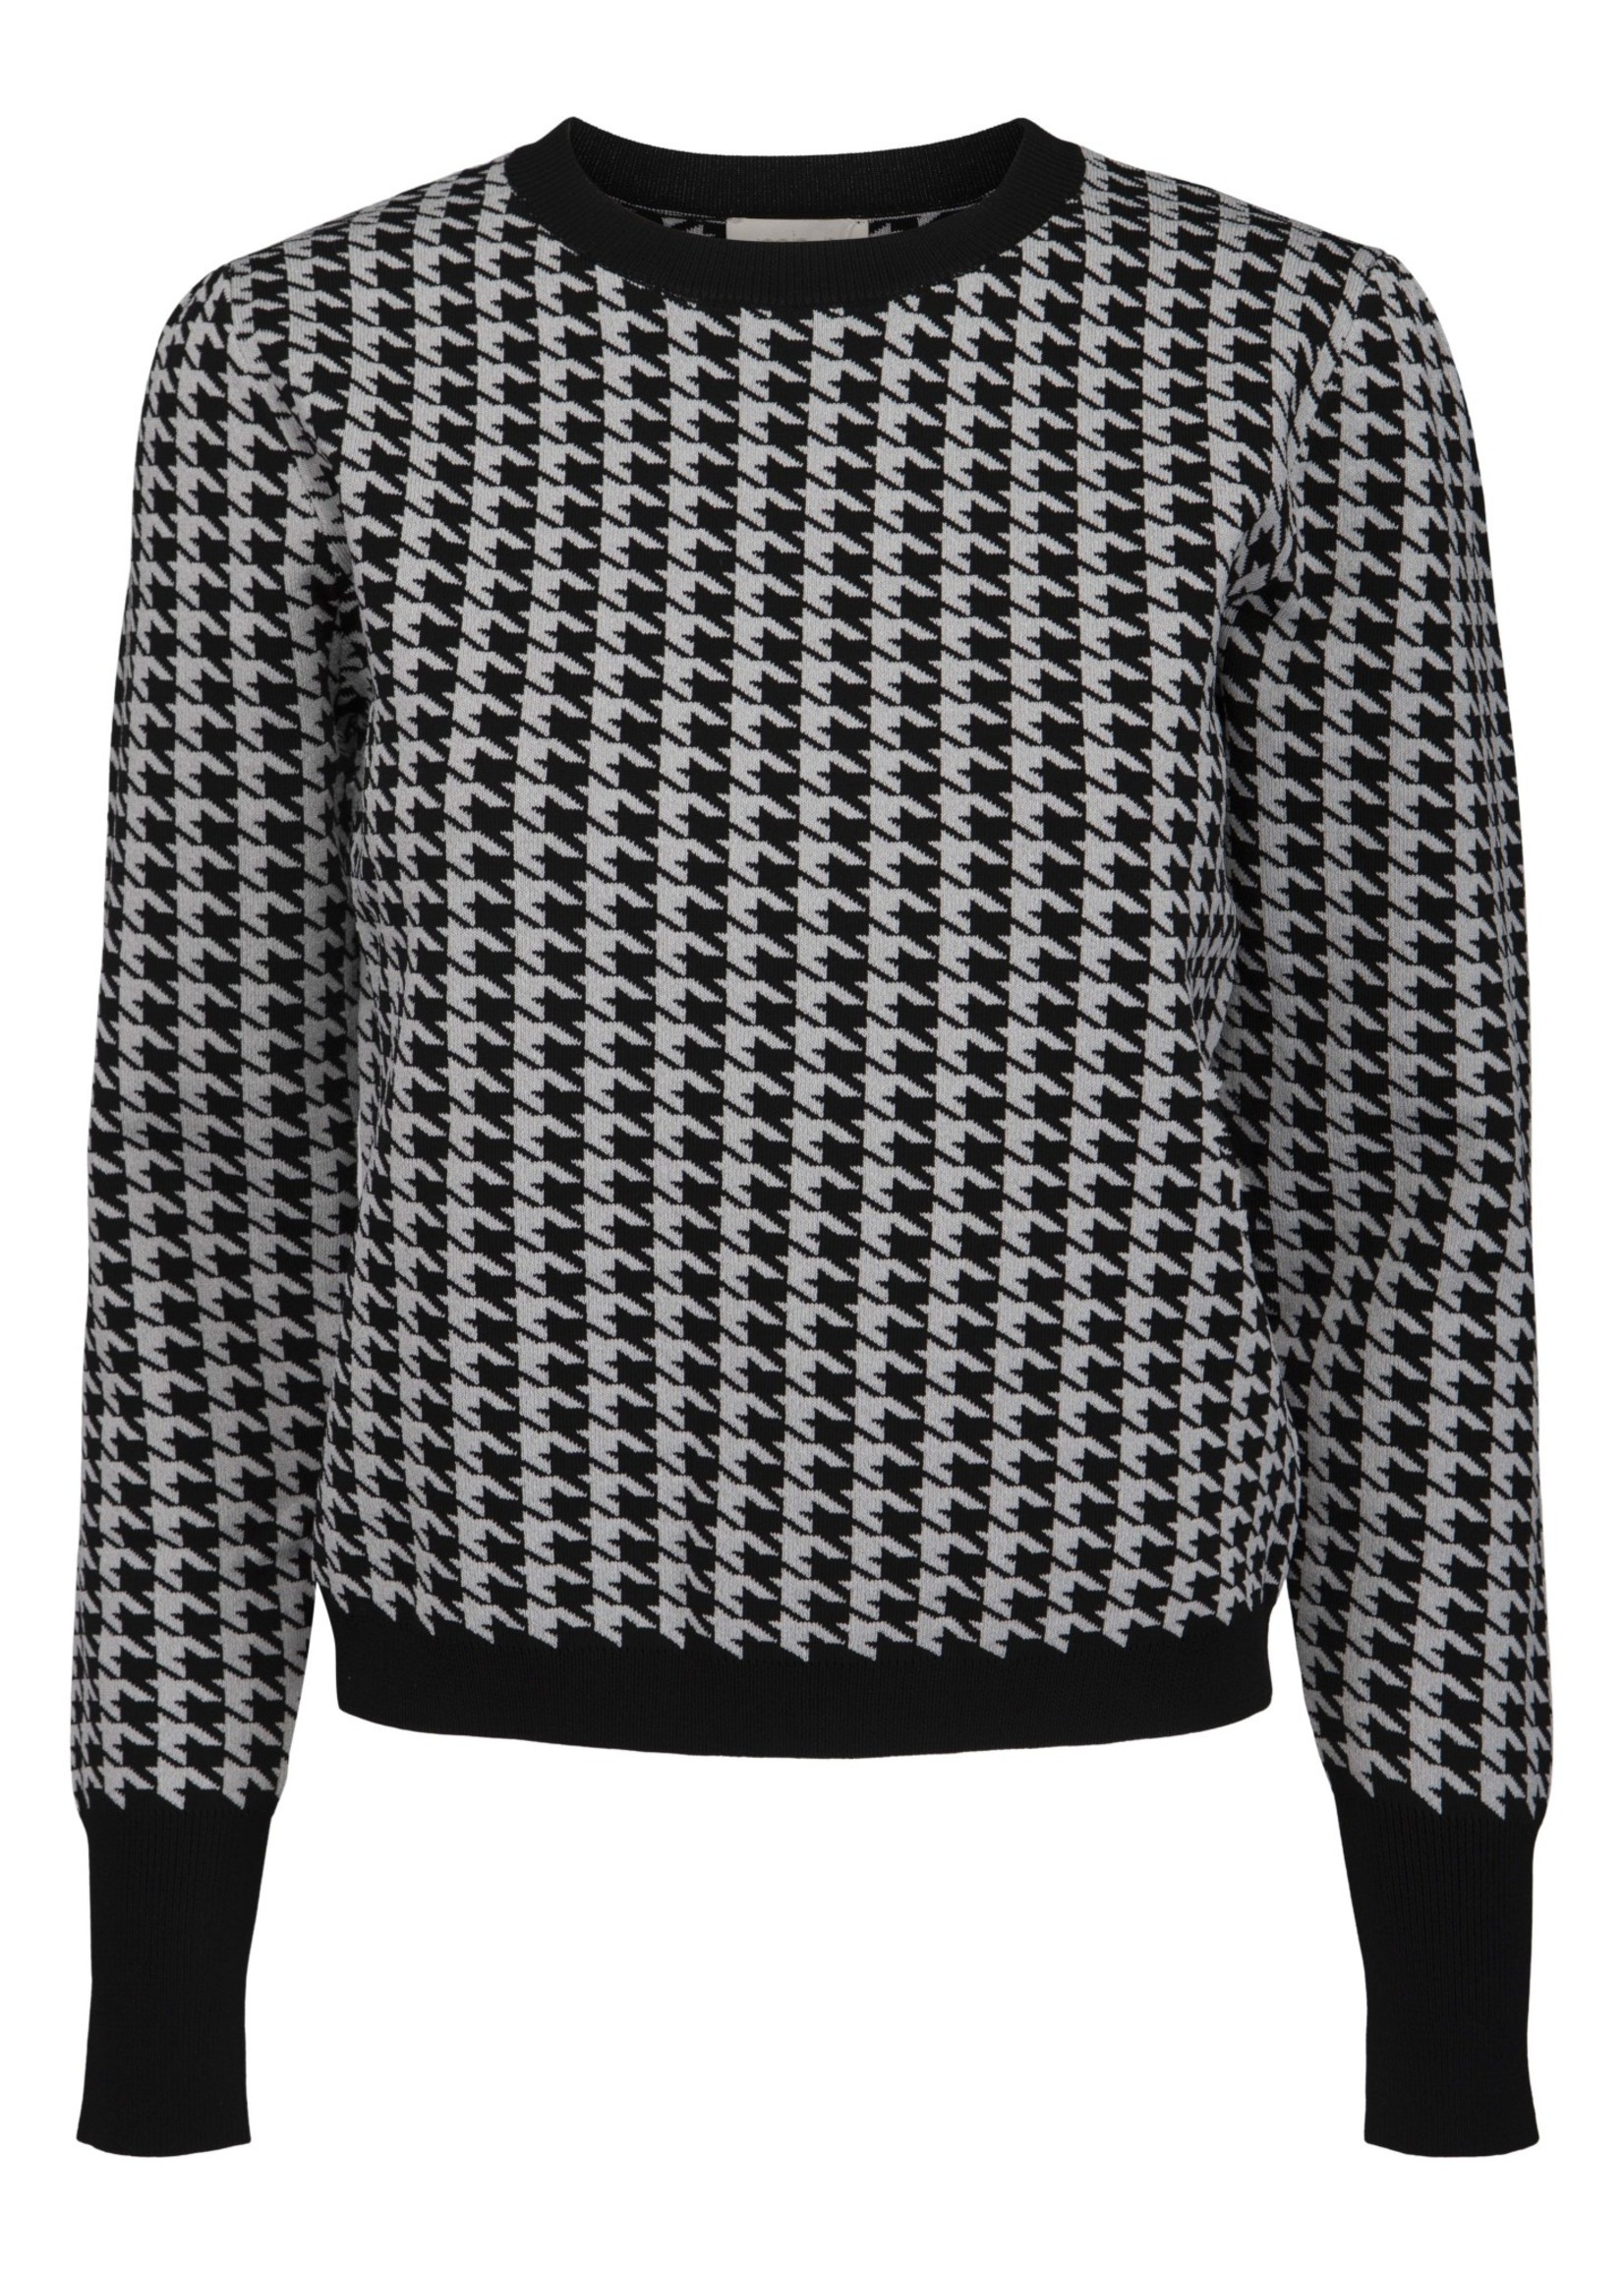 MINUS Hailey knit pullover Black/Steel grey checked